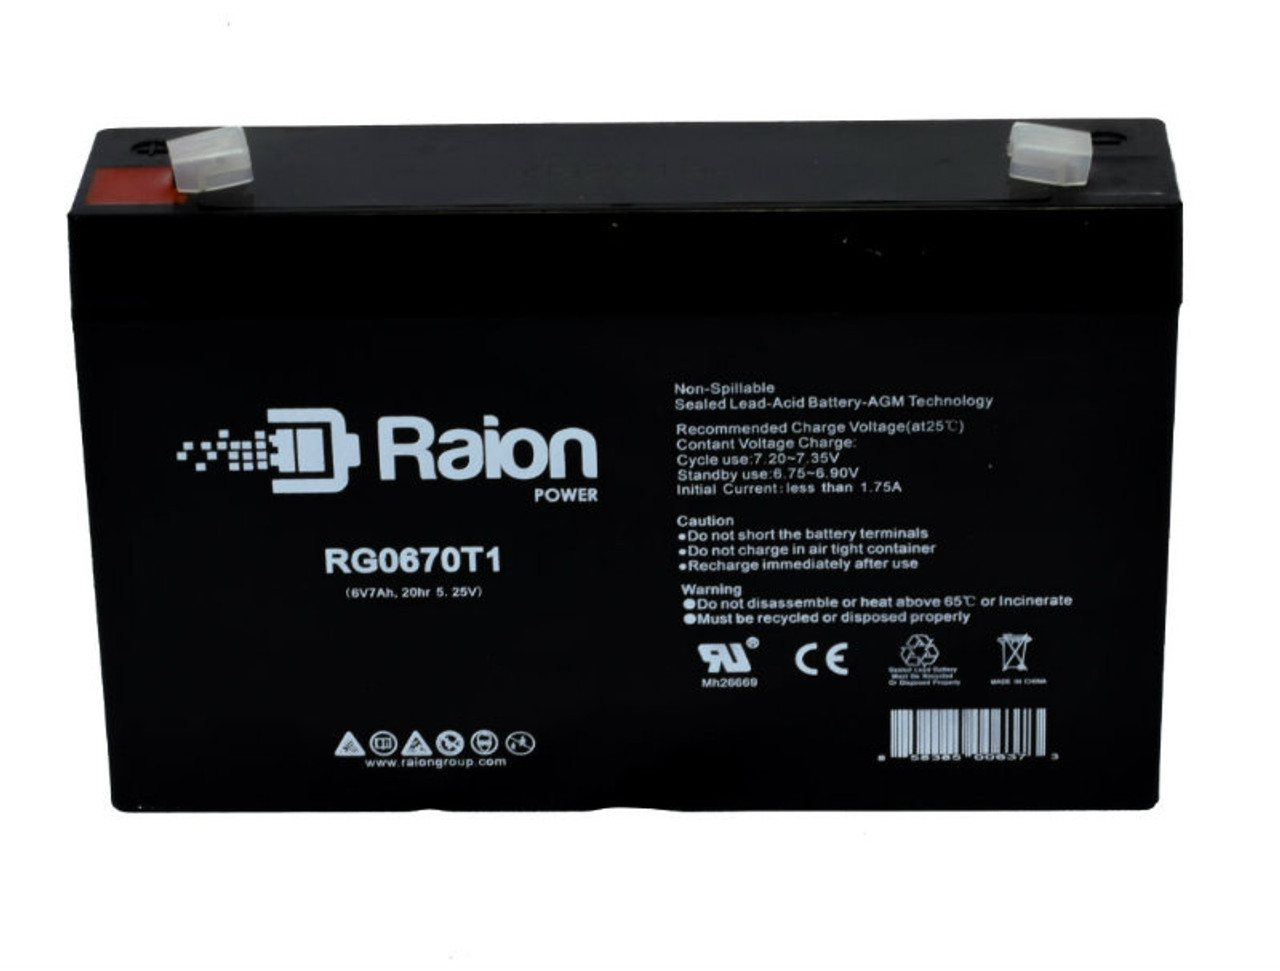 Raion Power RG0670T1 Replacement Battery Cartridge for Sure-Lites 12V1505